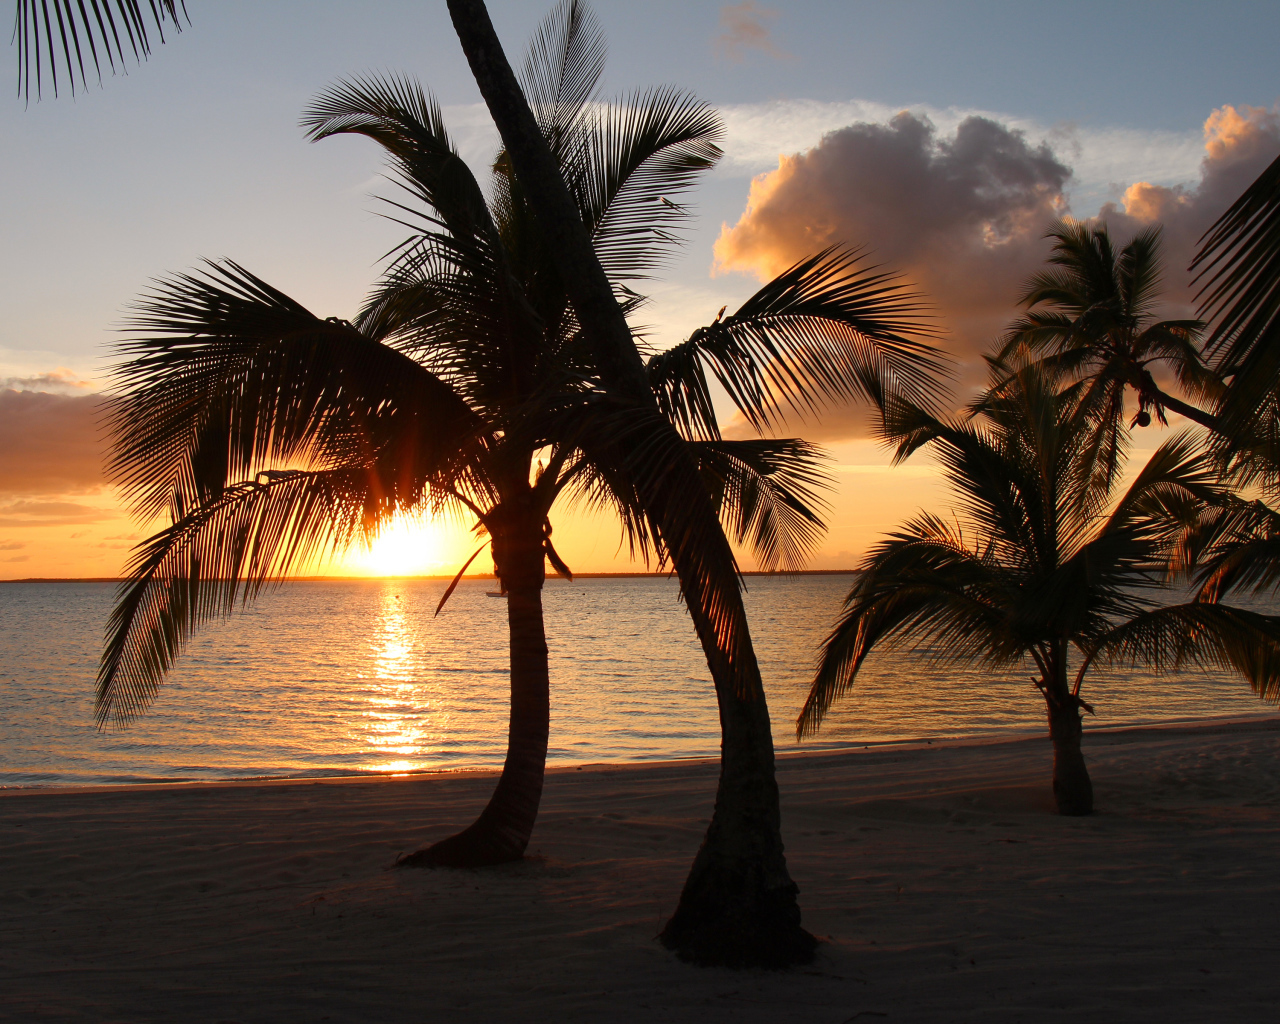 Large palm trees on the sand against the backdrop of the sun at sunset in the ocean